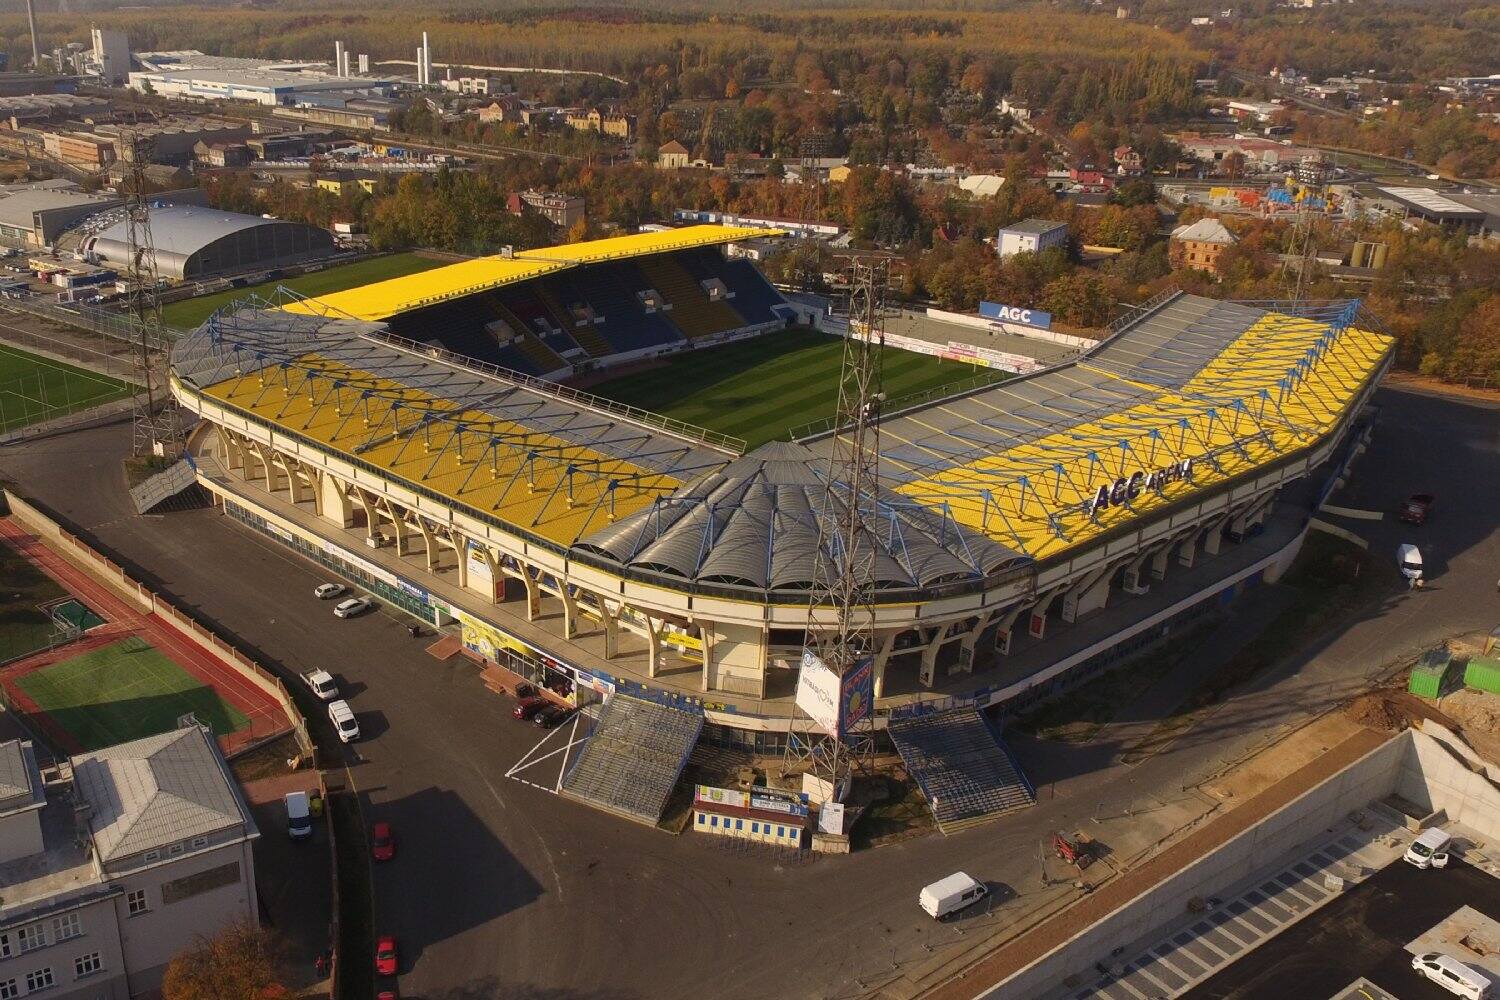 15-fascinating-facts-about-stadion-fk-teplice